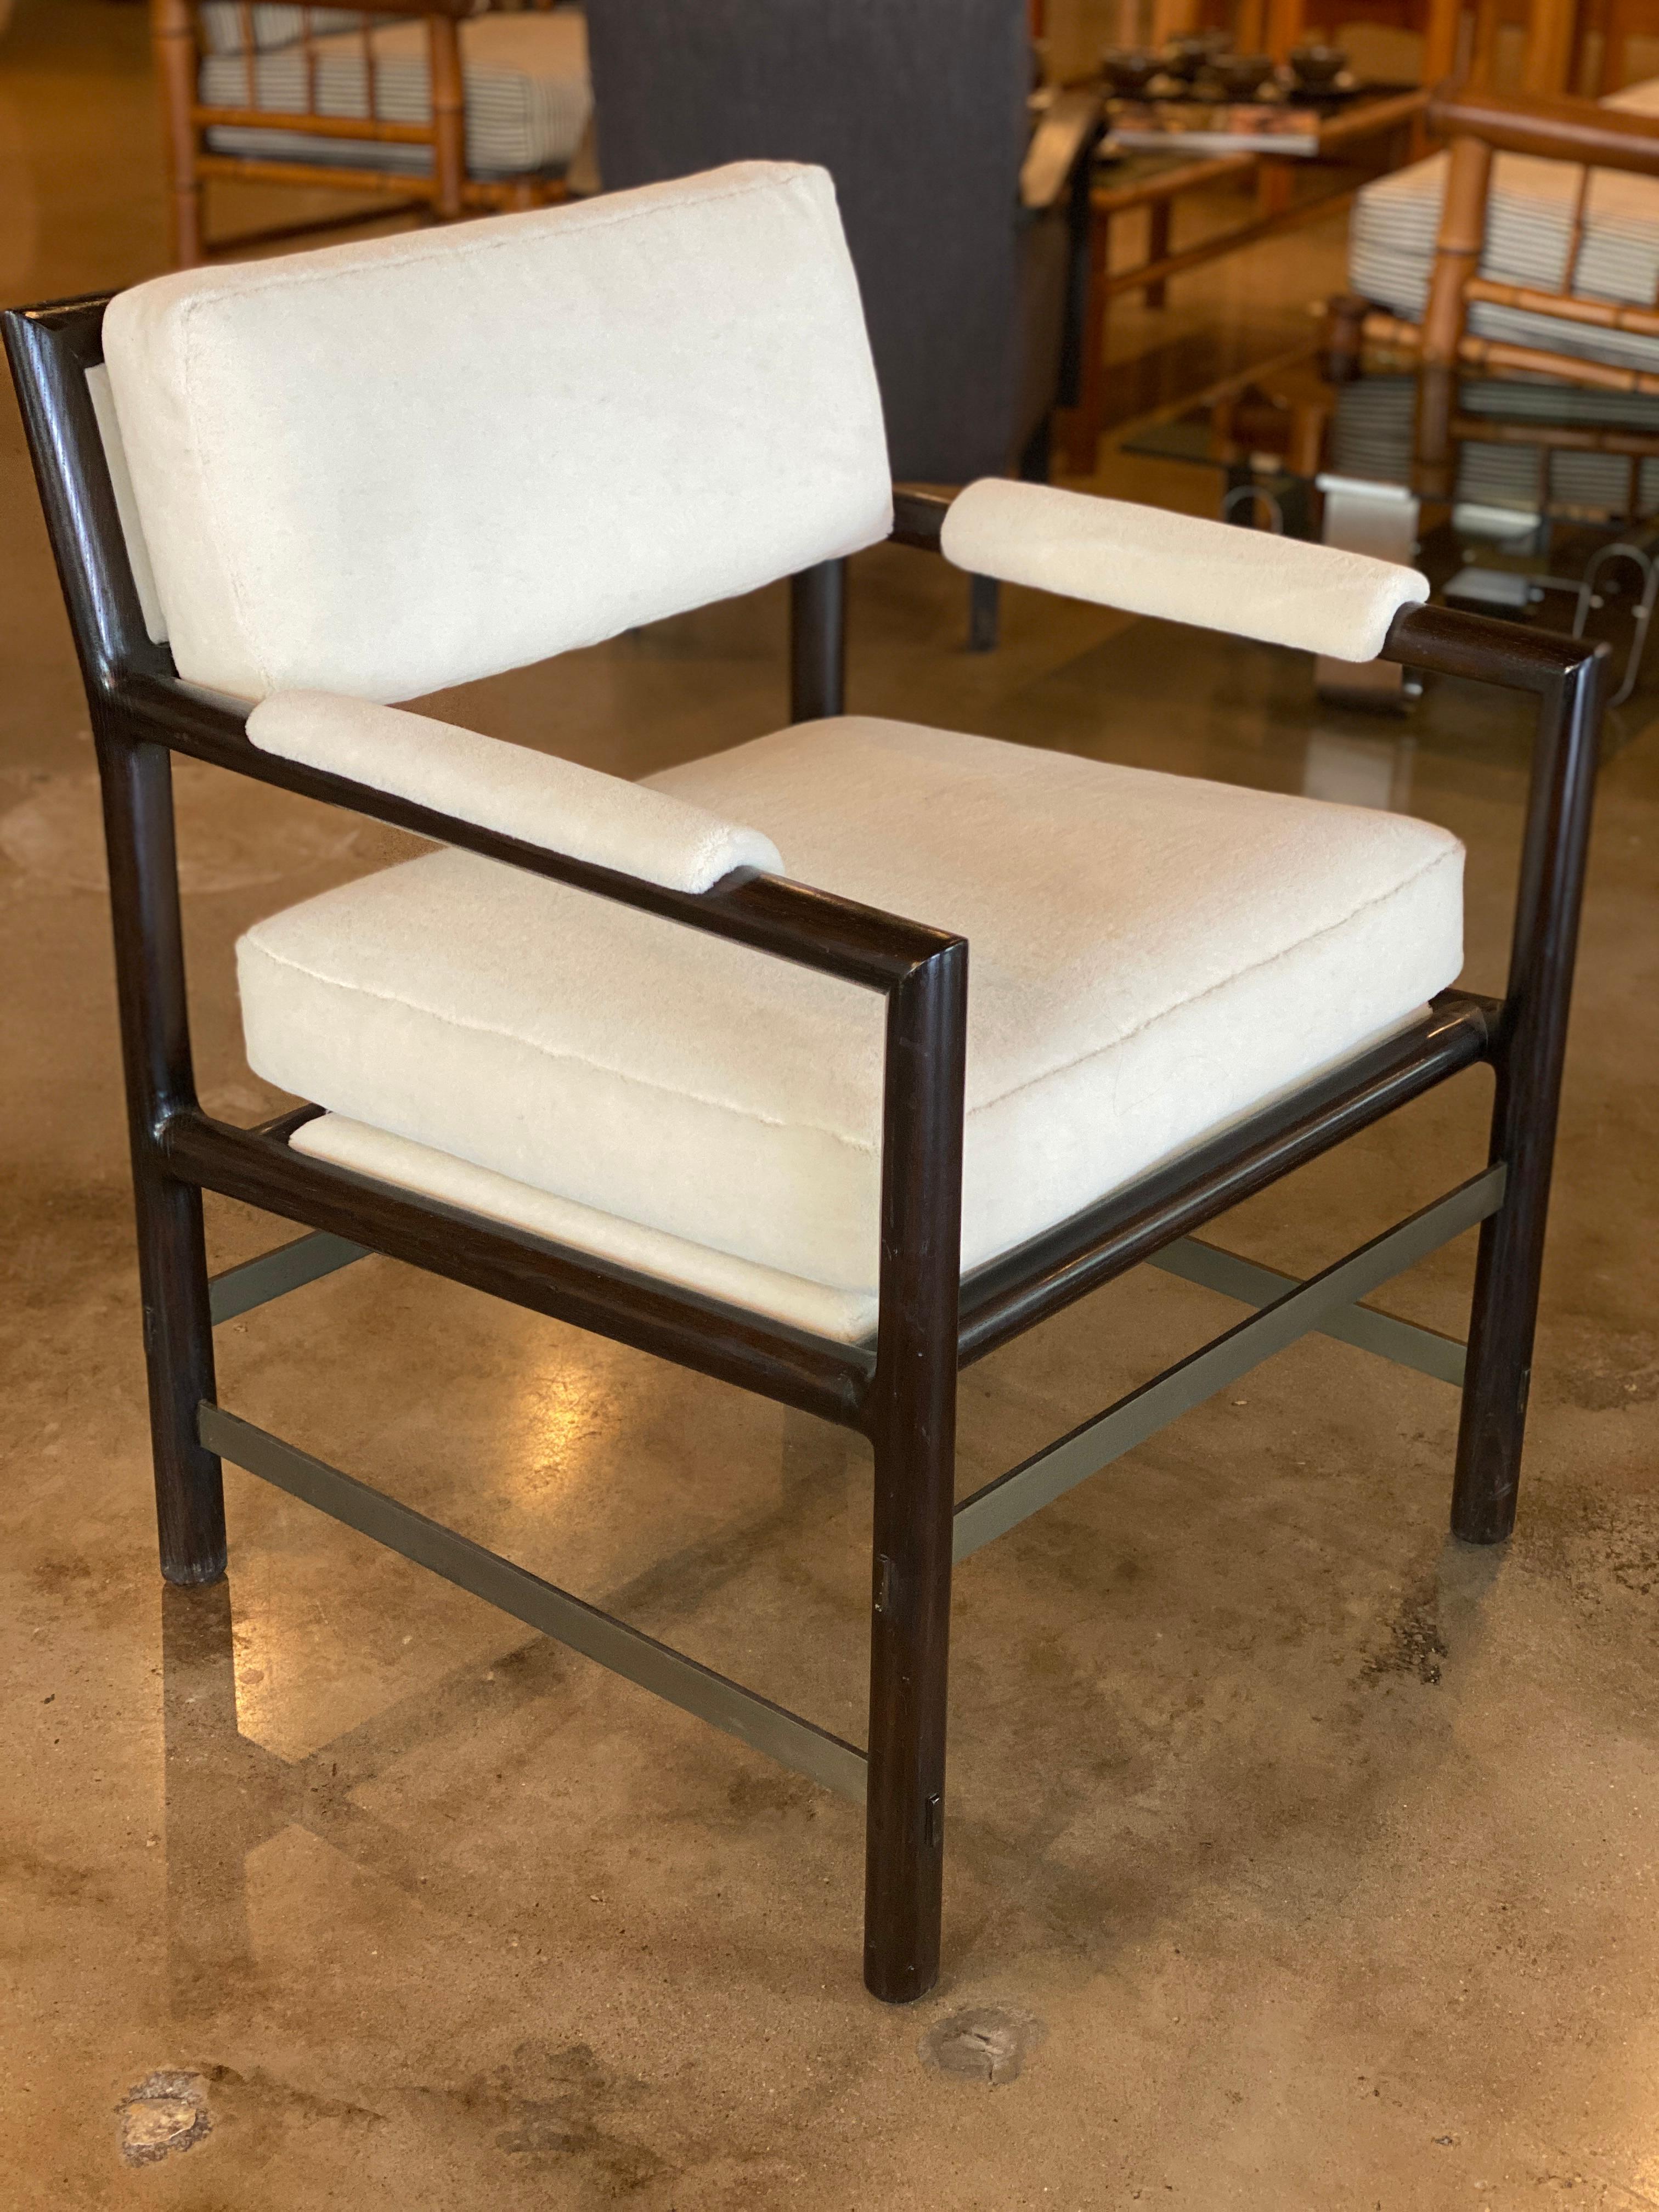 Pair of Edward Wormley for Dunbar armchairs. Solid ash frames with ebony finish are held by solid bronze stretchers. Frame finish has been professionally touched up and the fabric has been newly upholstered in luxuriously soft off-white mohair.